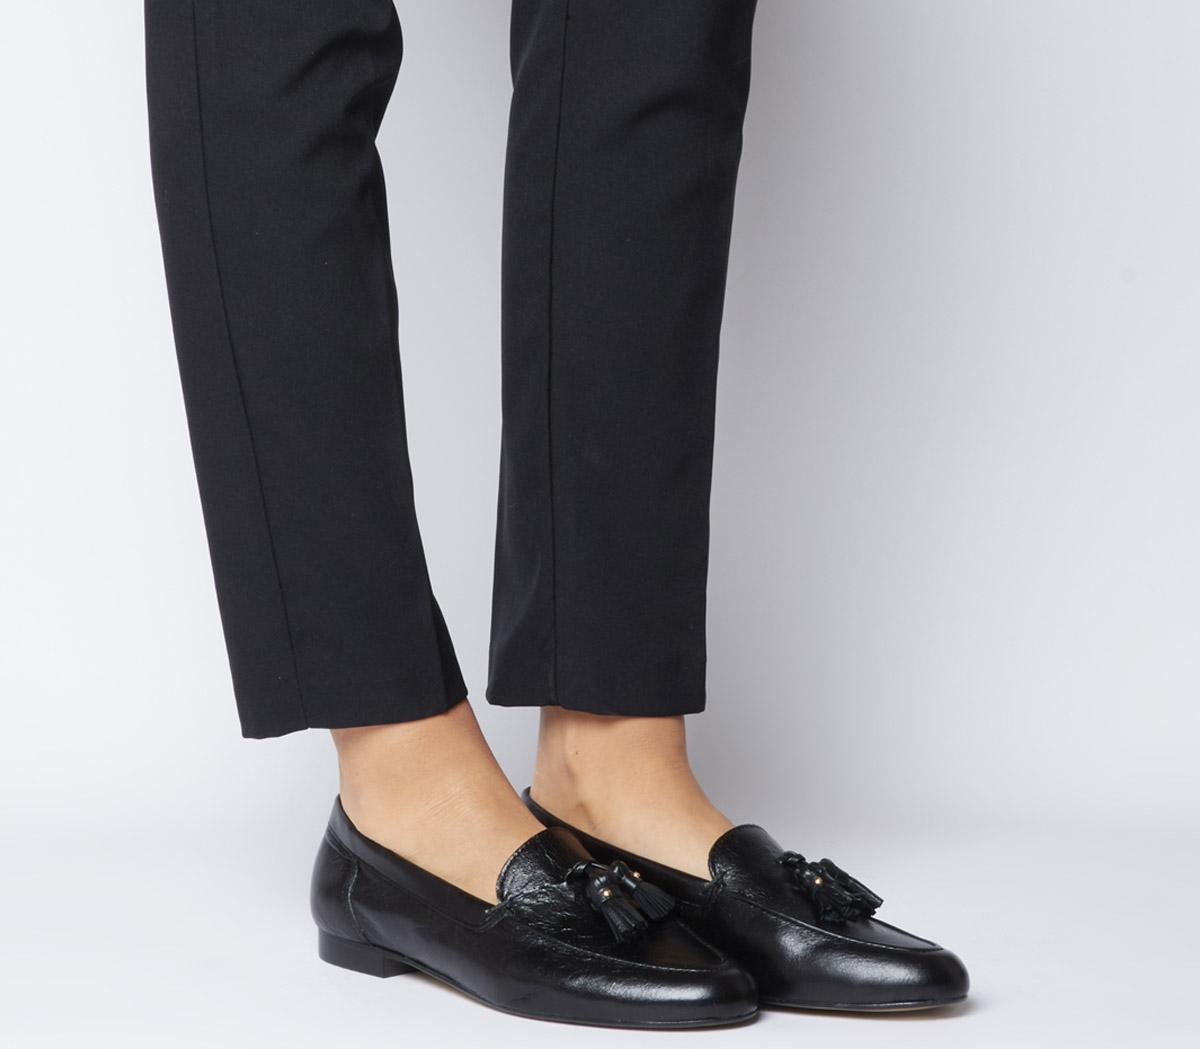 black loafers with tassels